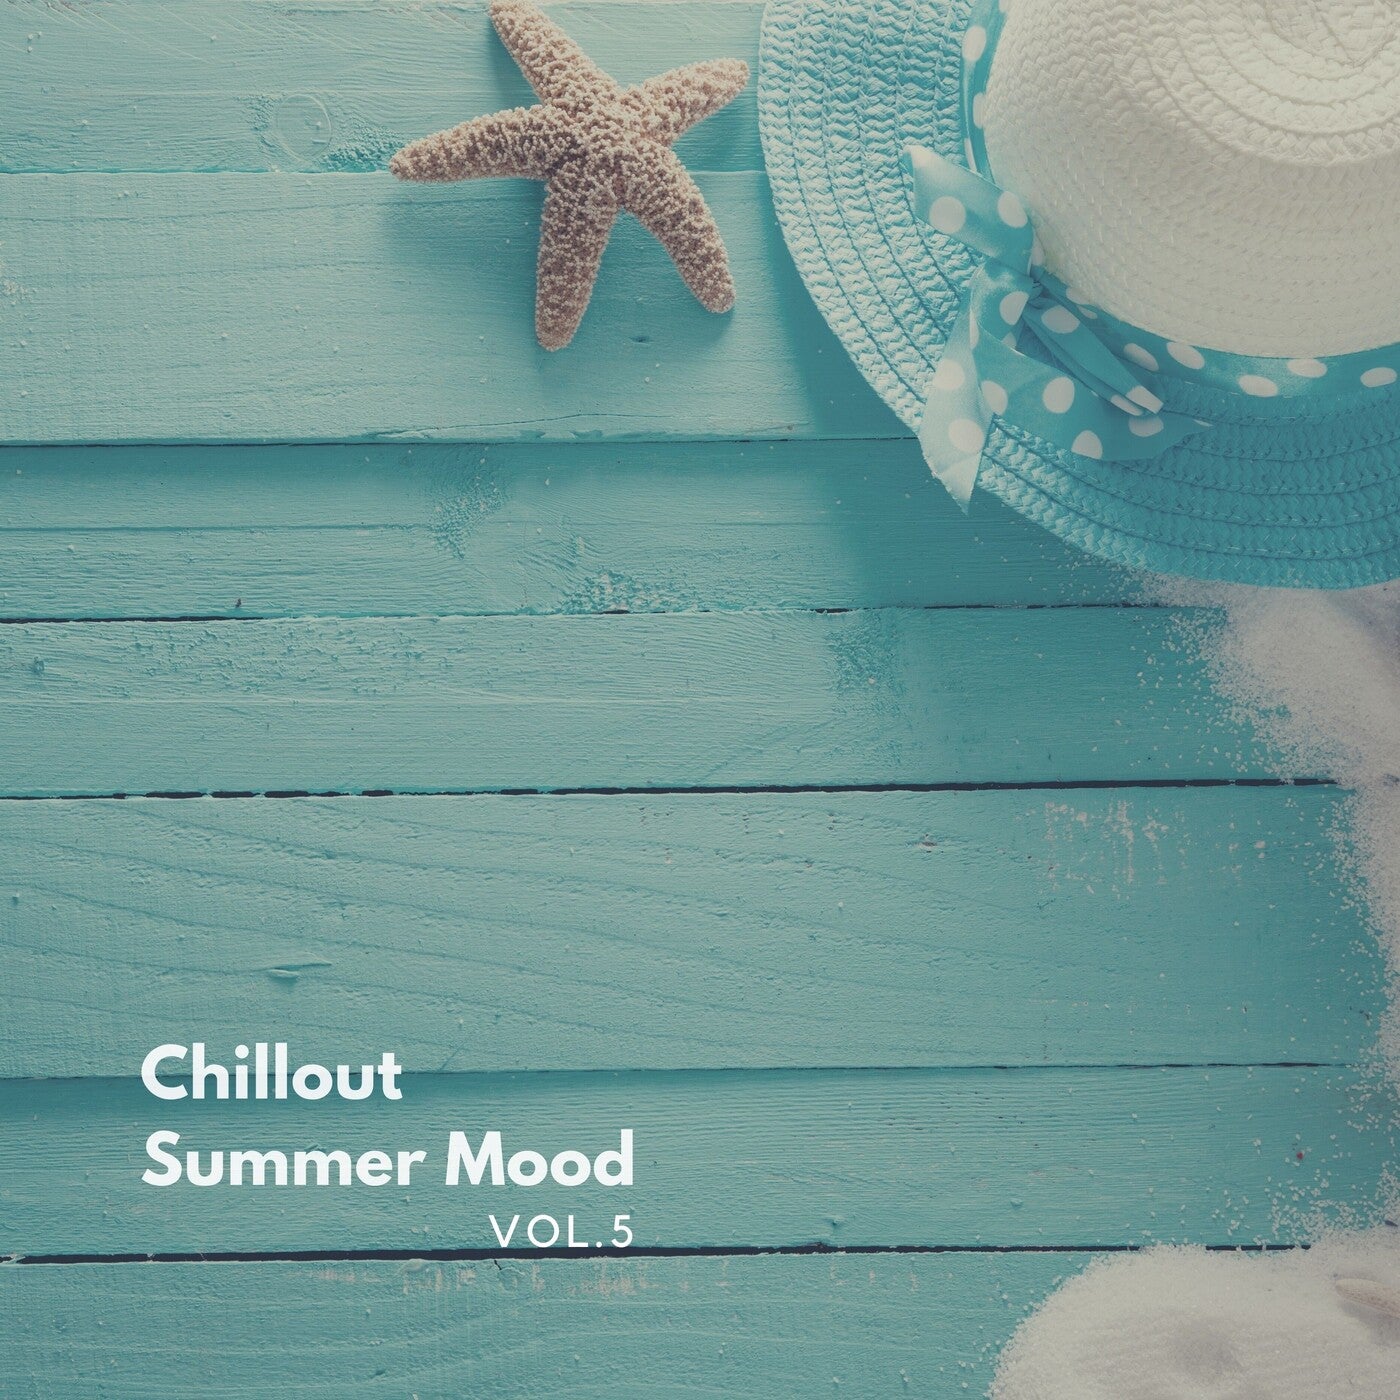 Chillout Summer Mood, Vol. 5